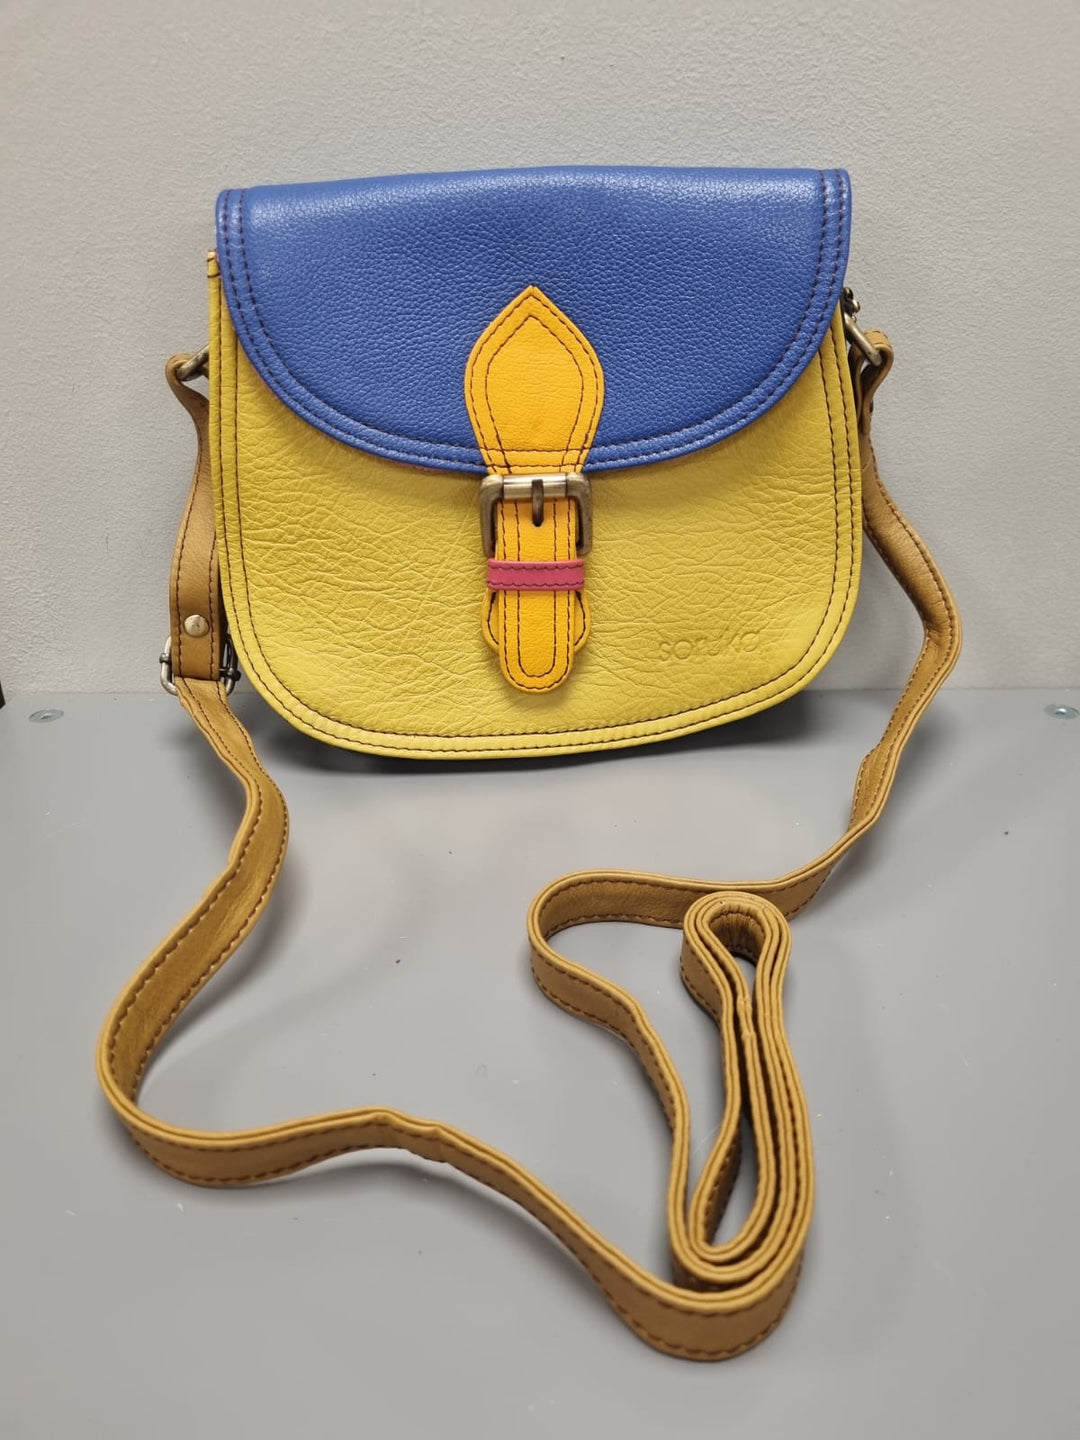 Ally Leather Cross Body Bag - Mustard Yellow & Blue